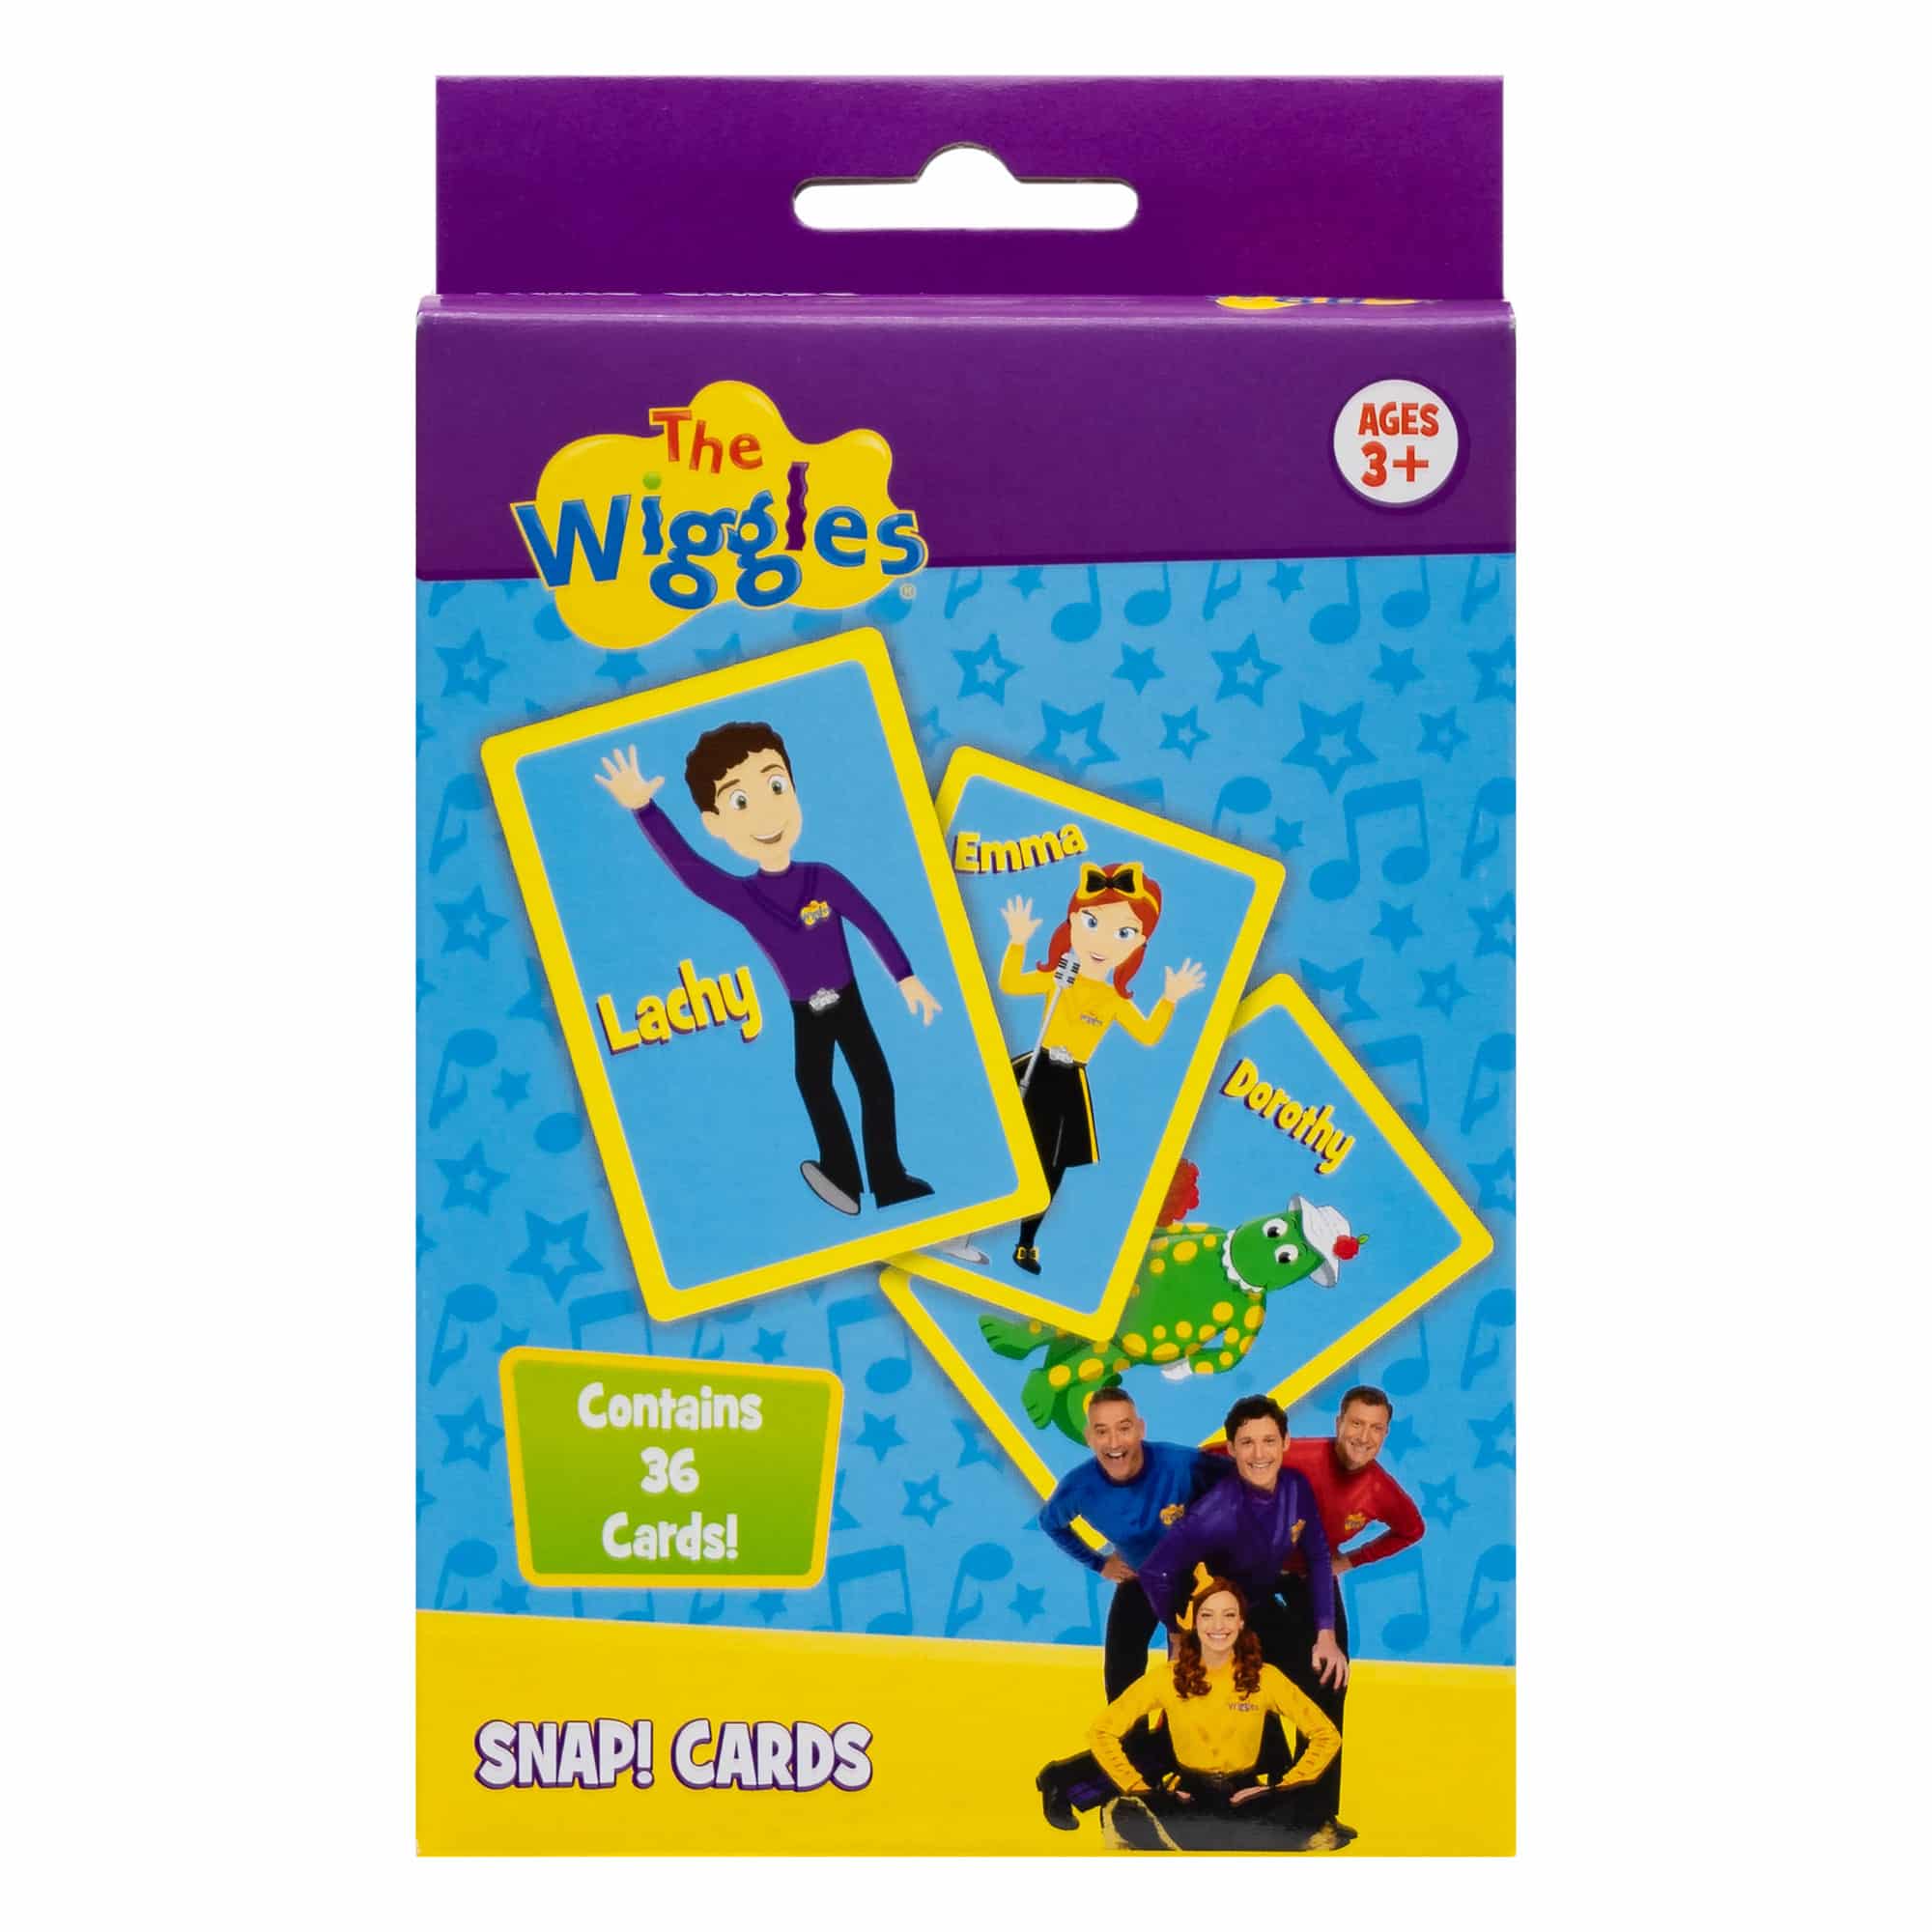 The Wiggles - Snap Card Game